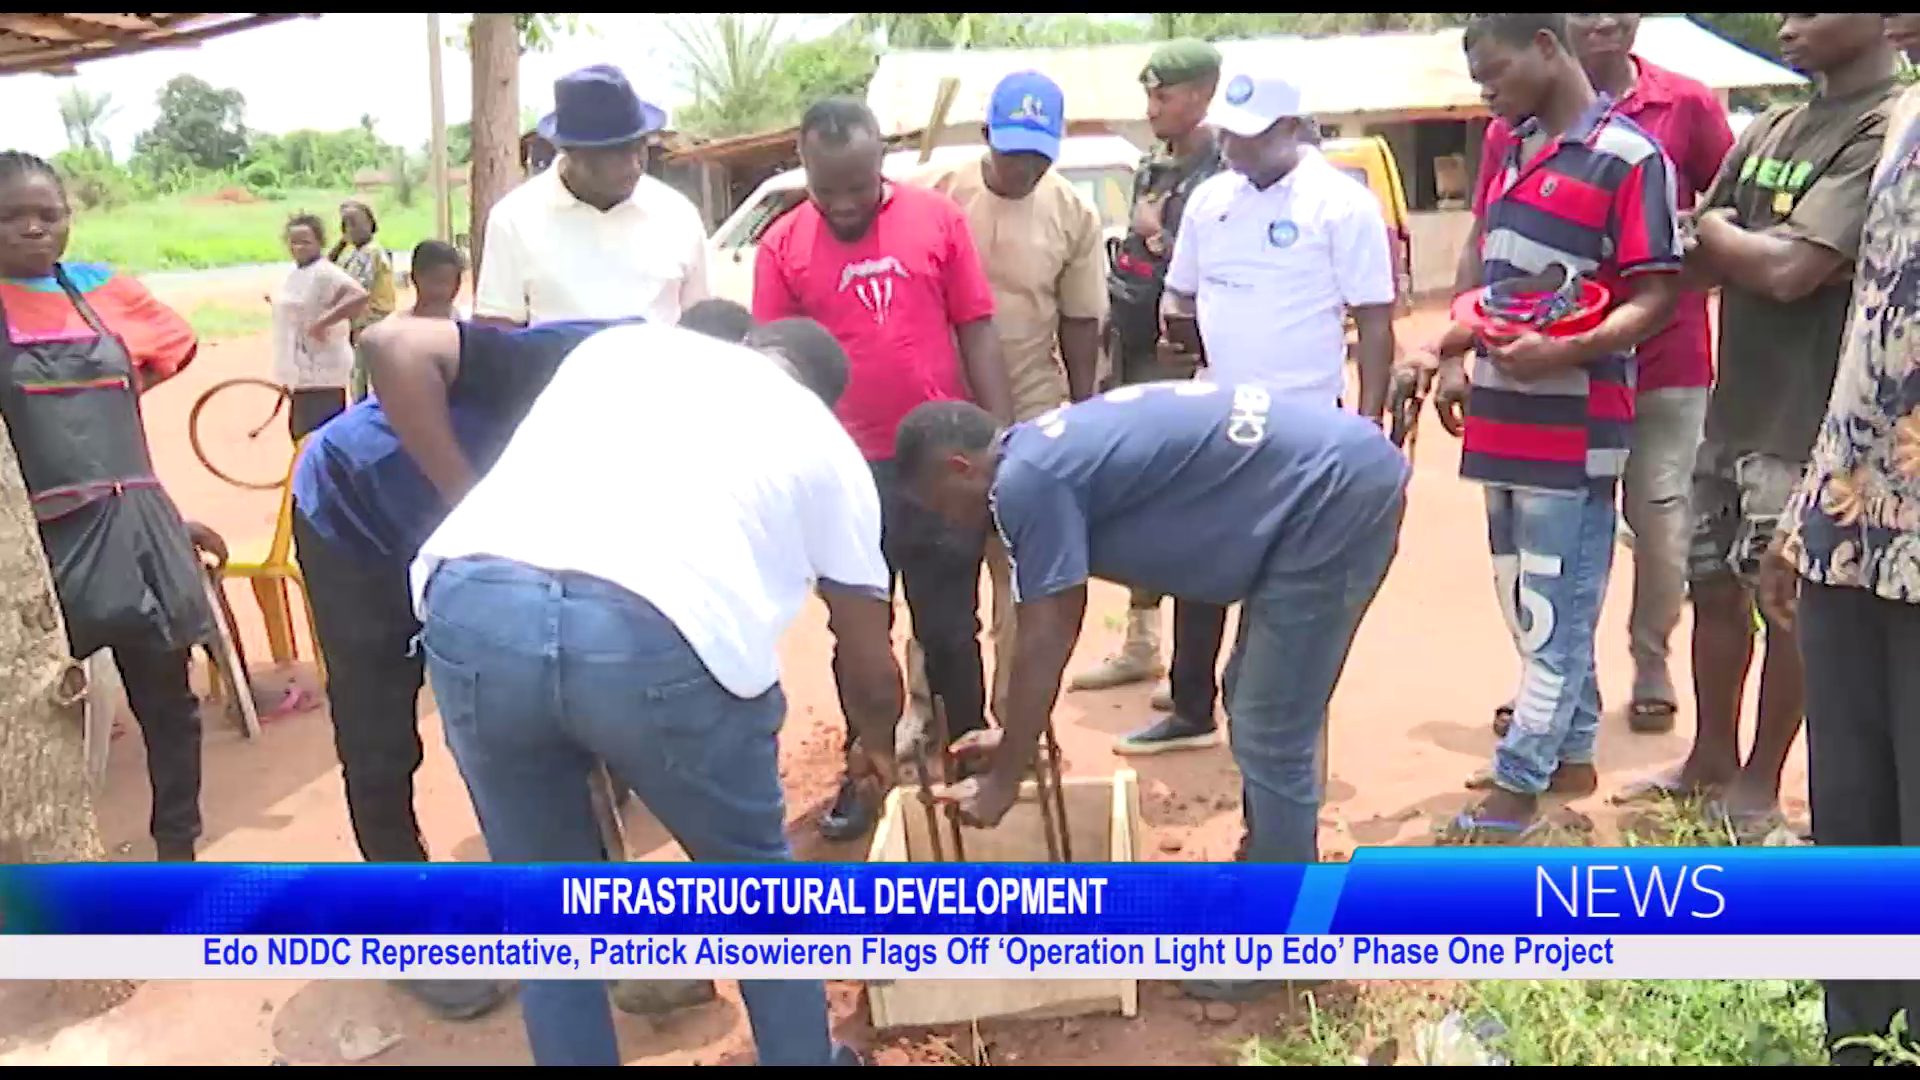 Edo NDDC Representative, Patrick Aisowieren Flags Off ‘Operation Light Up Edo’ Phase One Project